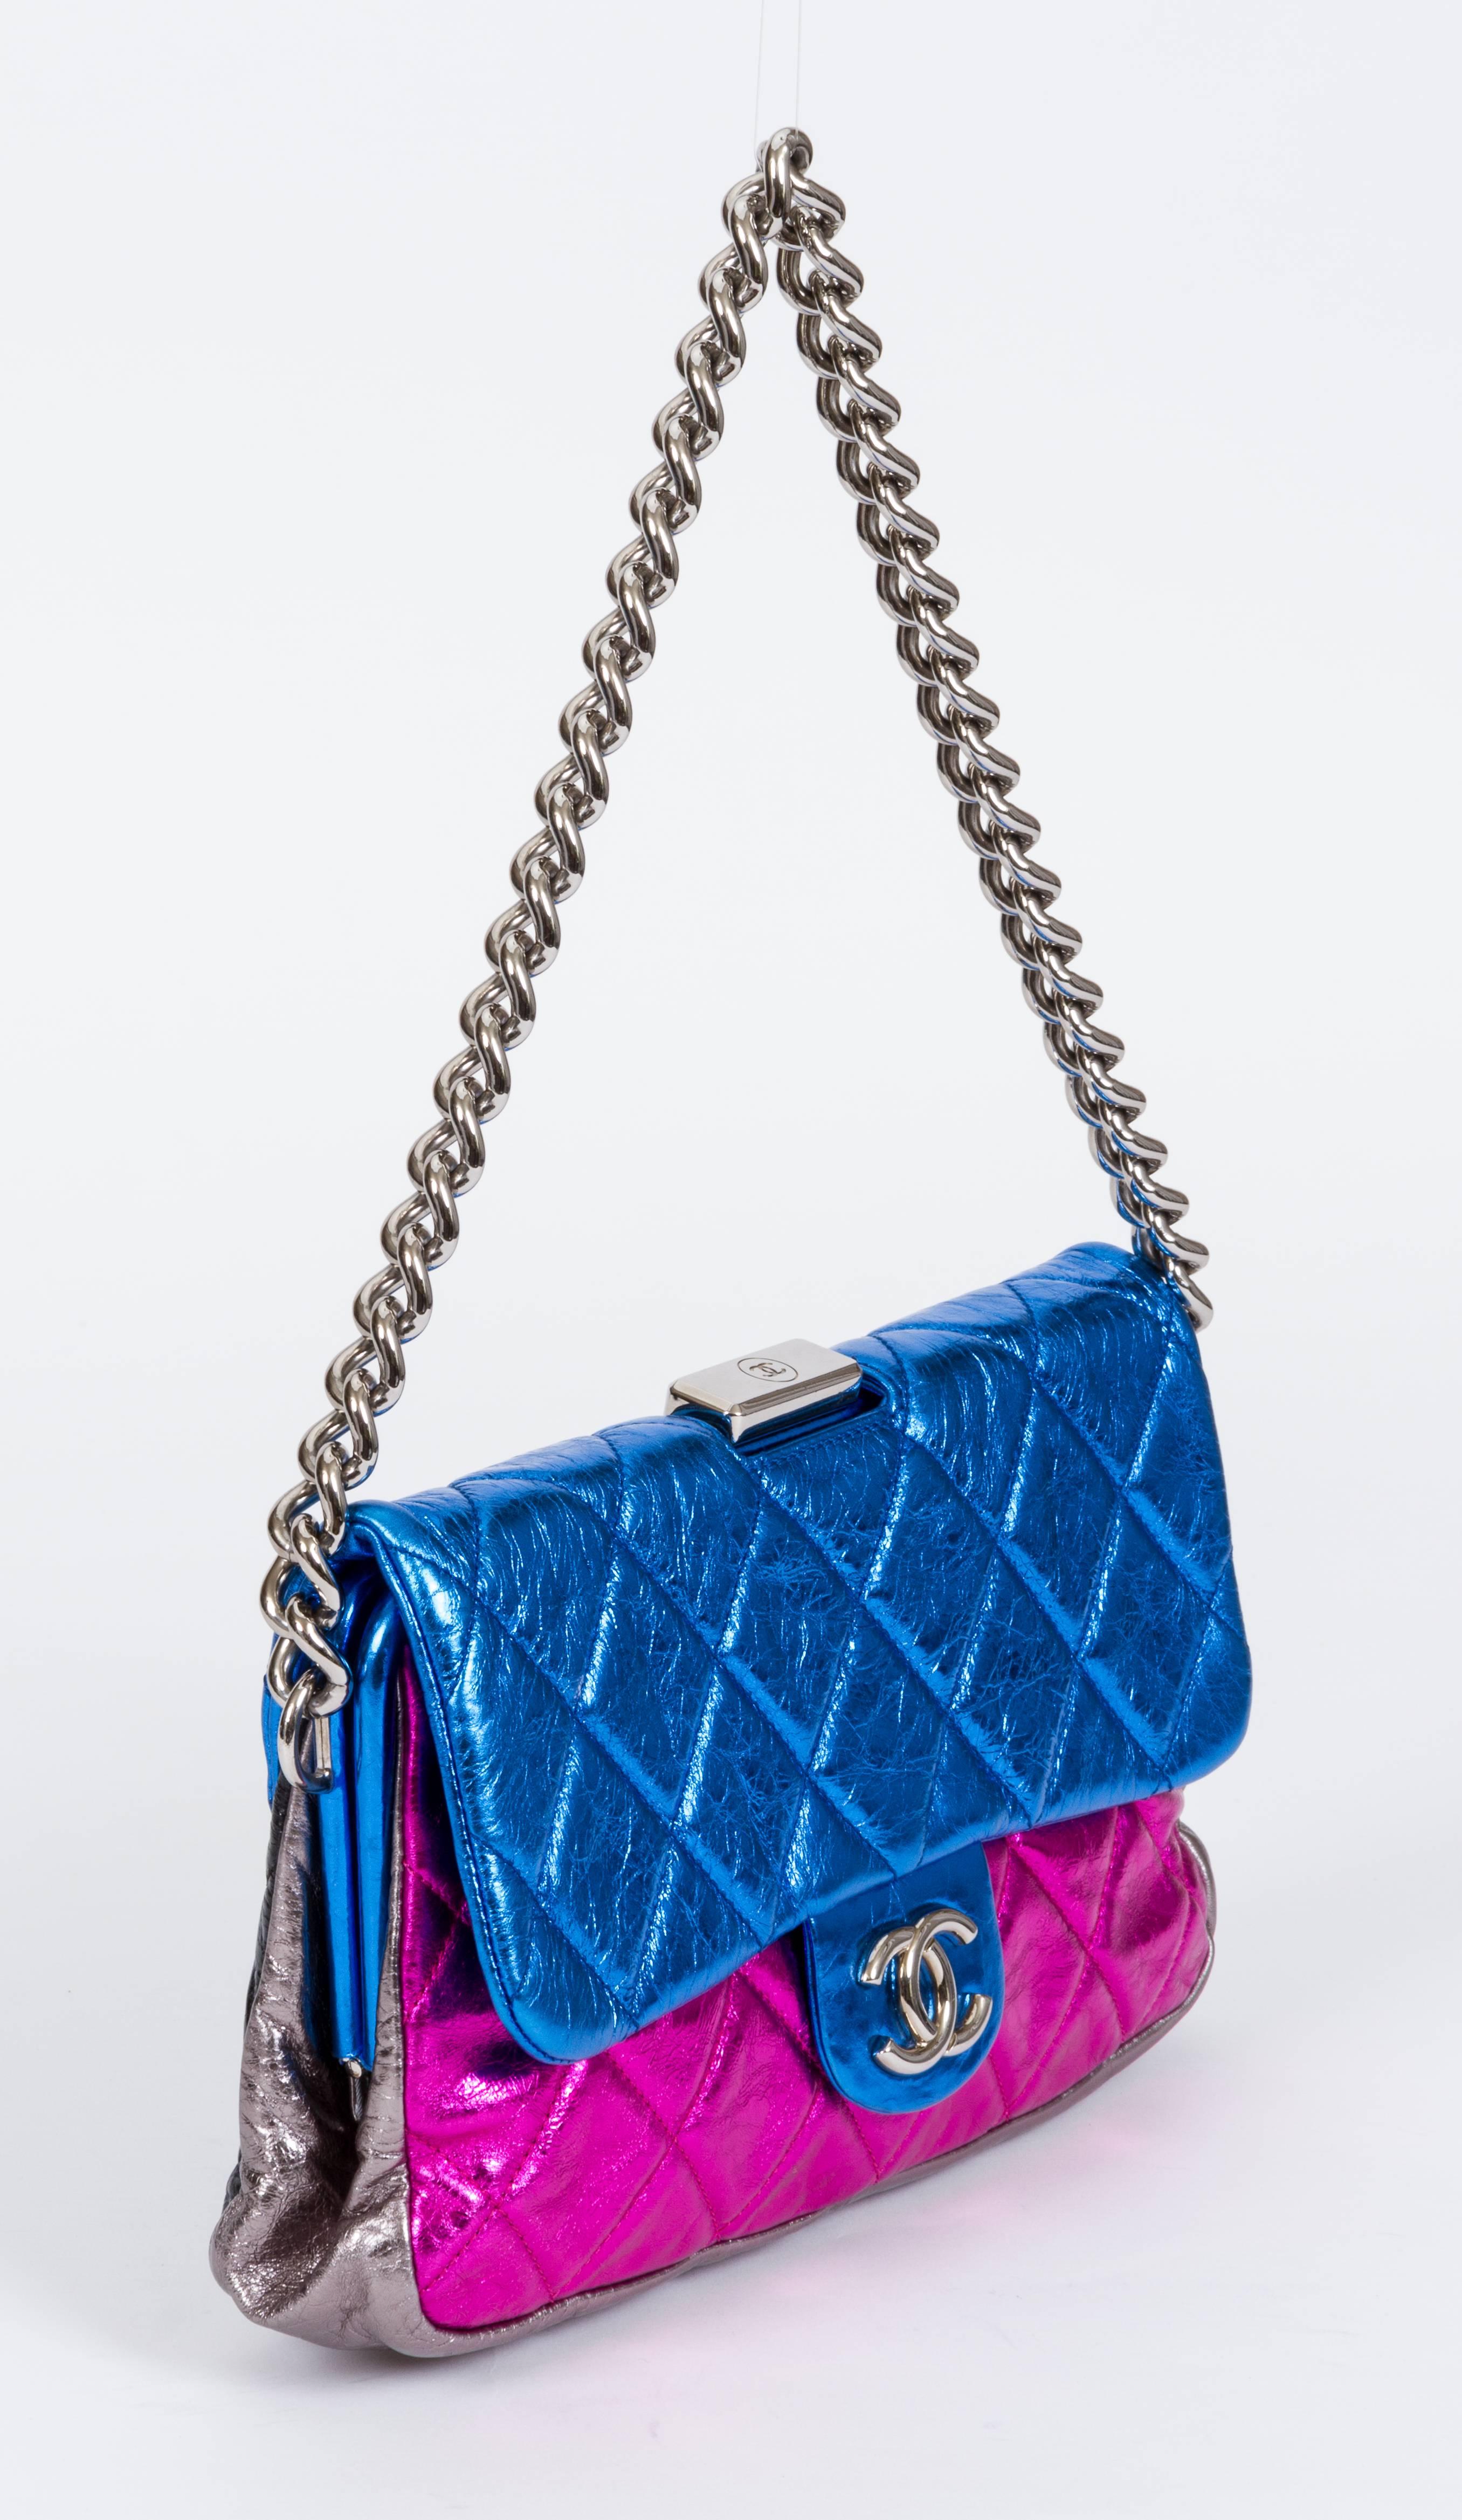 Chanel limited edition 4 color metallic leather bag with kiss lock and flap clasp. Collection 2008/2009. Measurements: 11